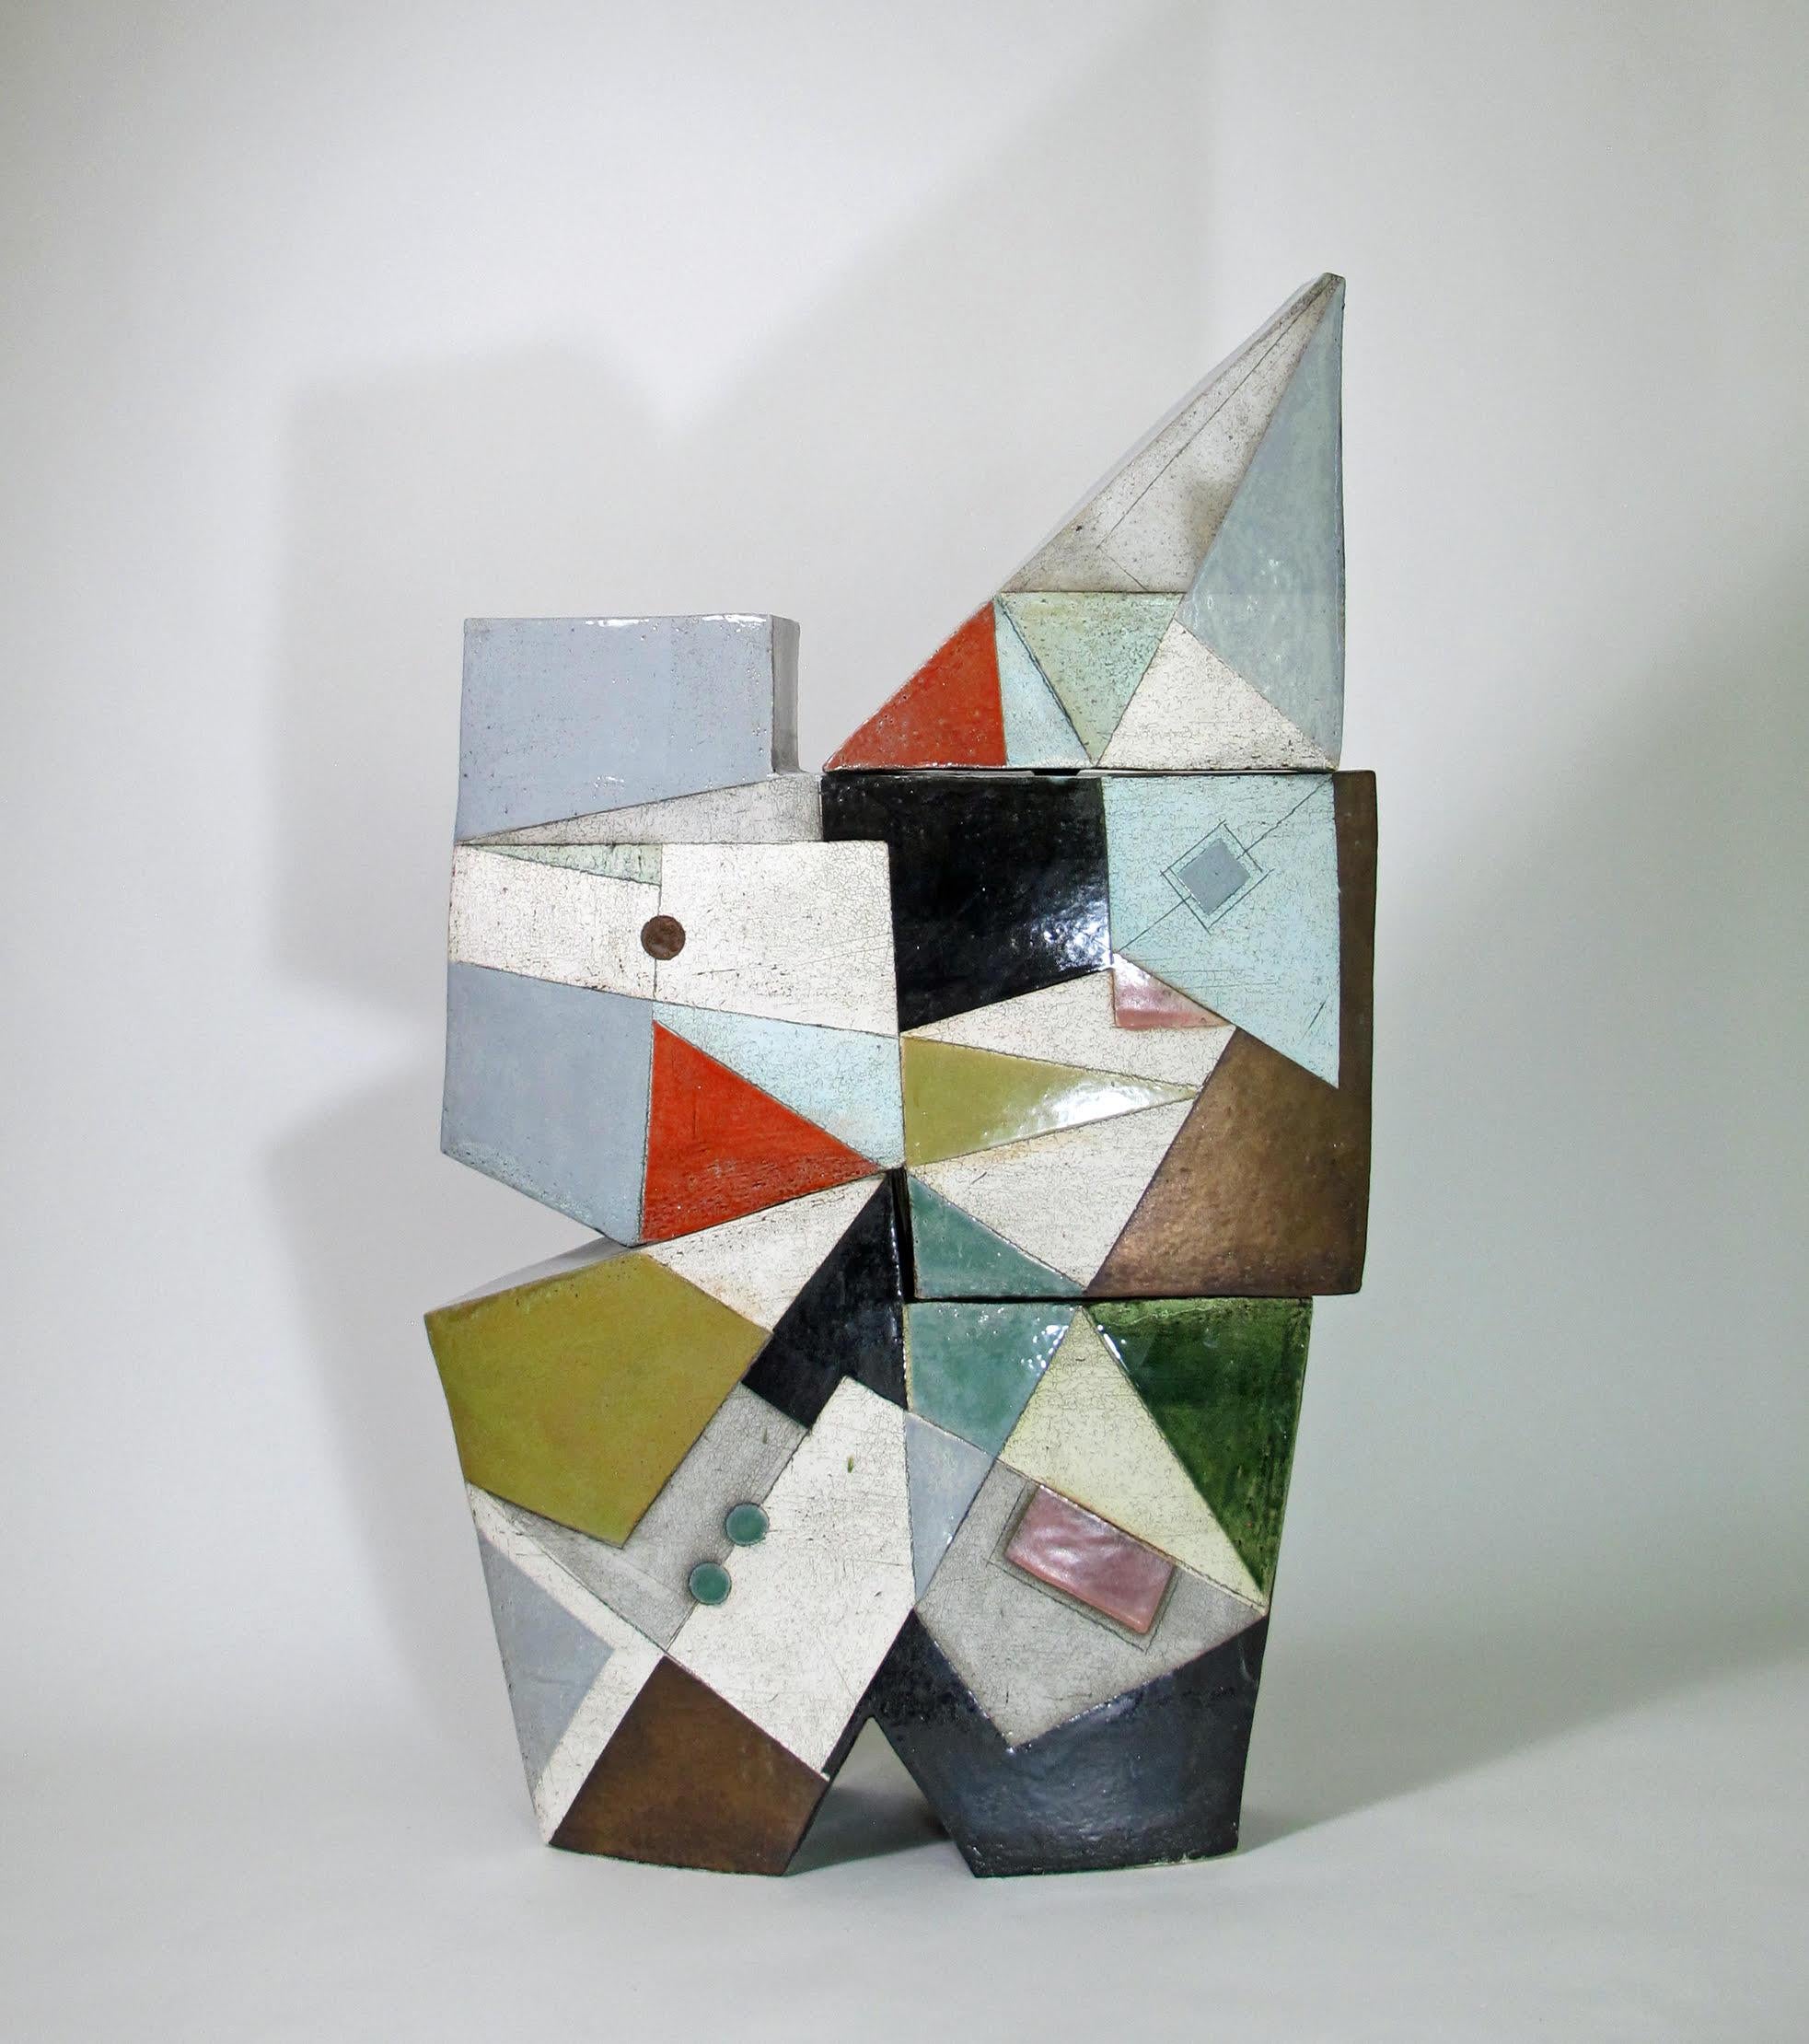 Available at Madelyn Jordon Fine Art. 'Cascade' by Contemporary American artist, Sheryl Zacharia. Ceramic, 27.5 x 18 x 6 in. This sculpture incorporates a rich palette of colors in green, mint green, red, yellow, pink, light blue, bronze, grey,